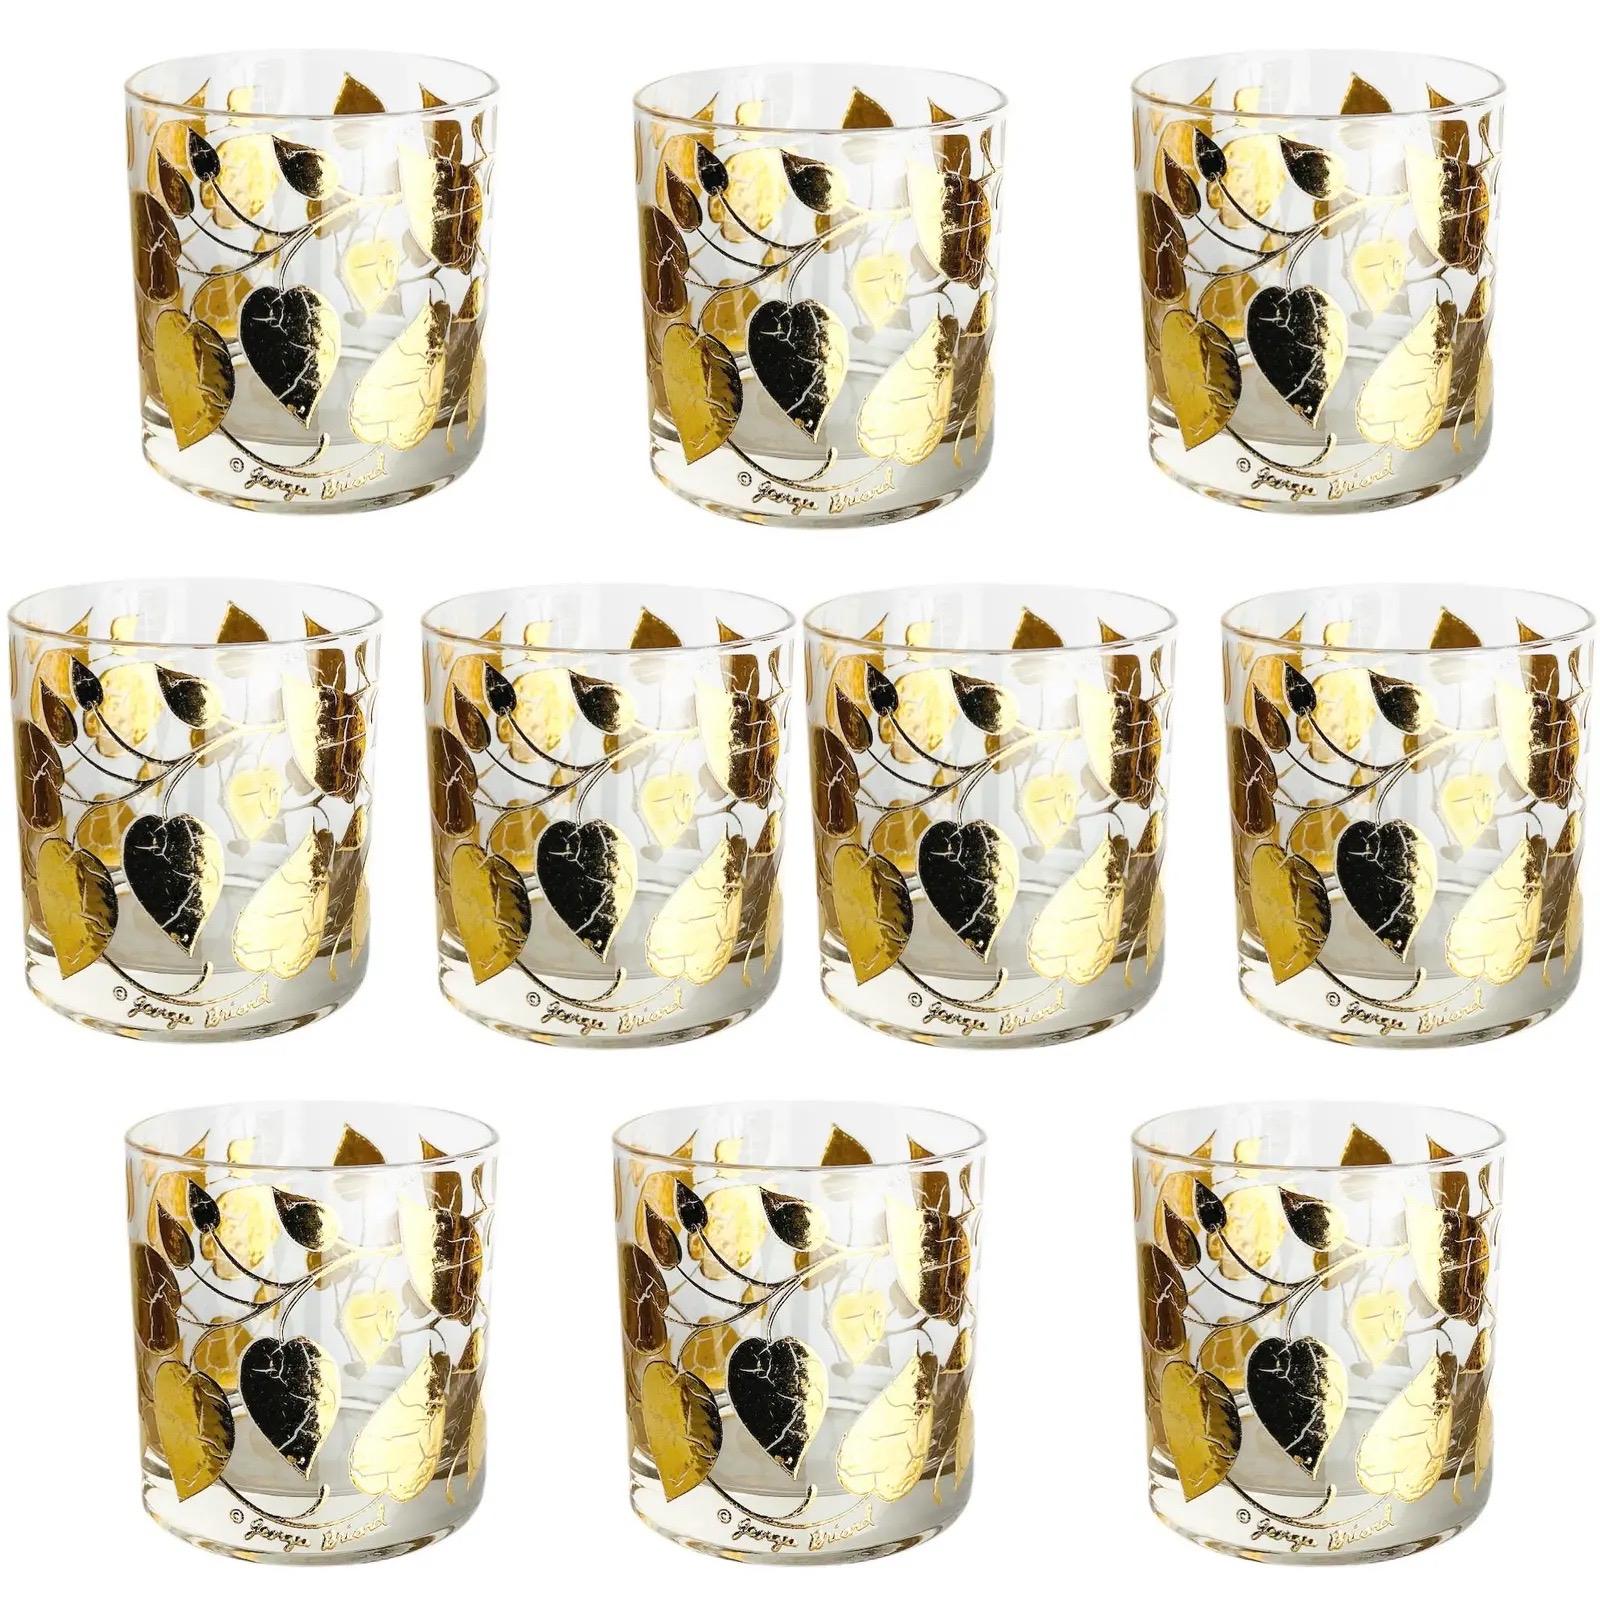 North American Georges Briard Gold Leaf Old Fashioned Tumbler Glasses, Set of 10